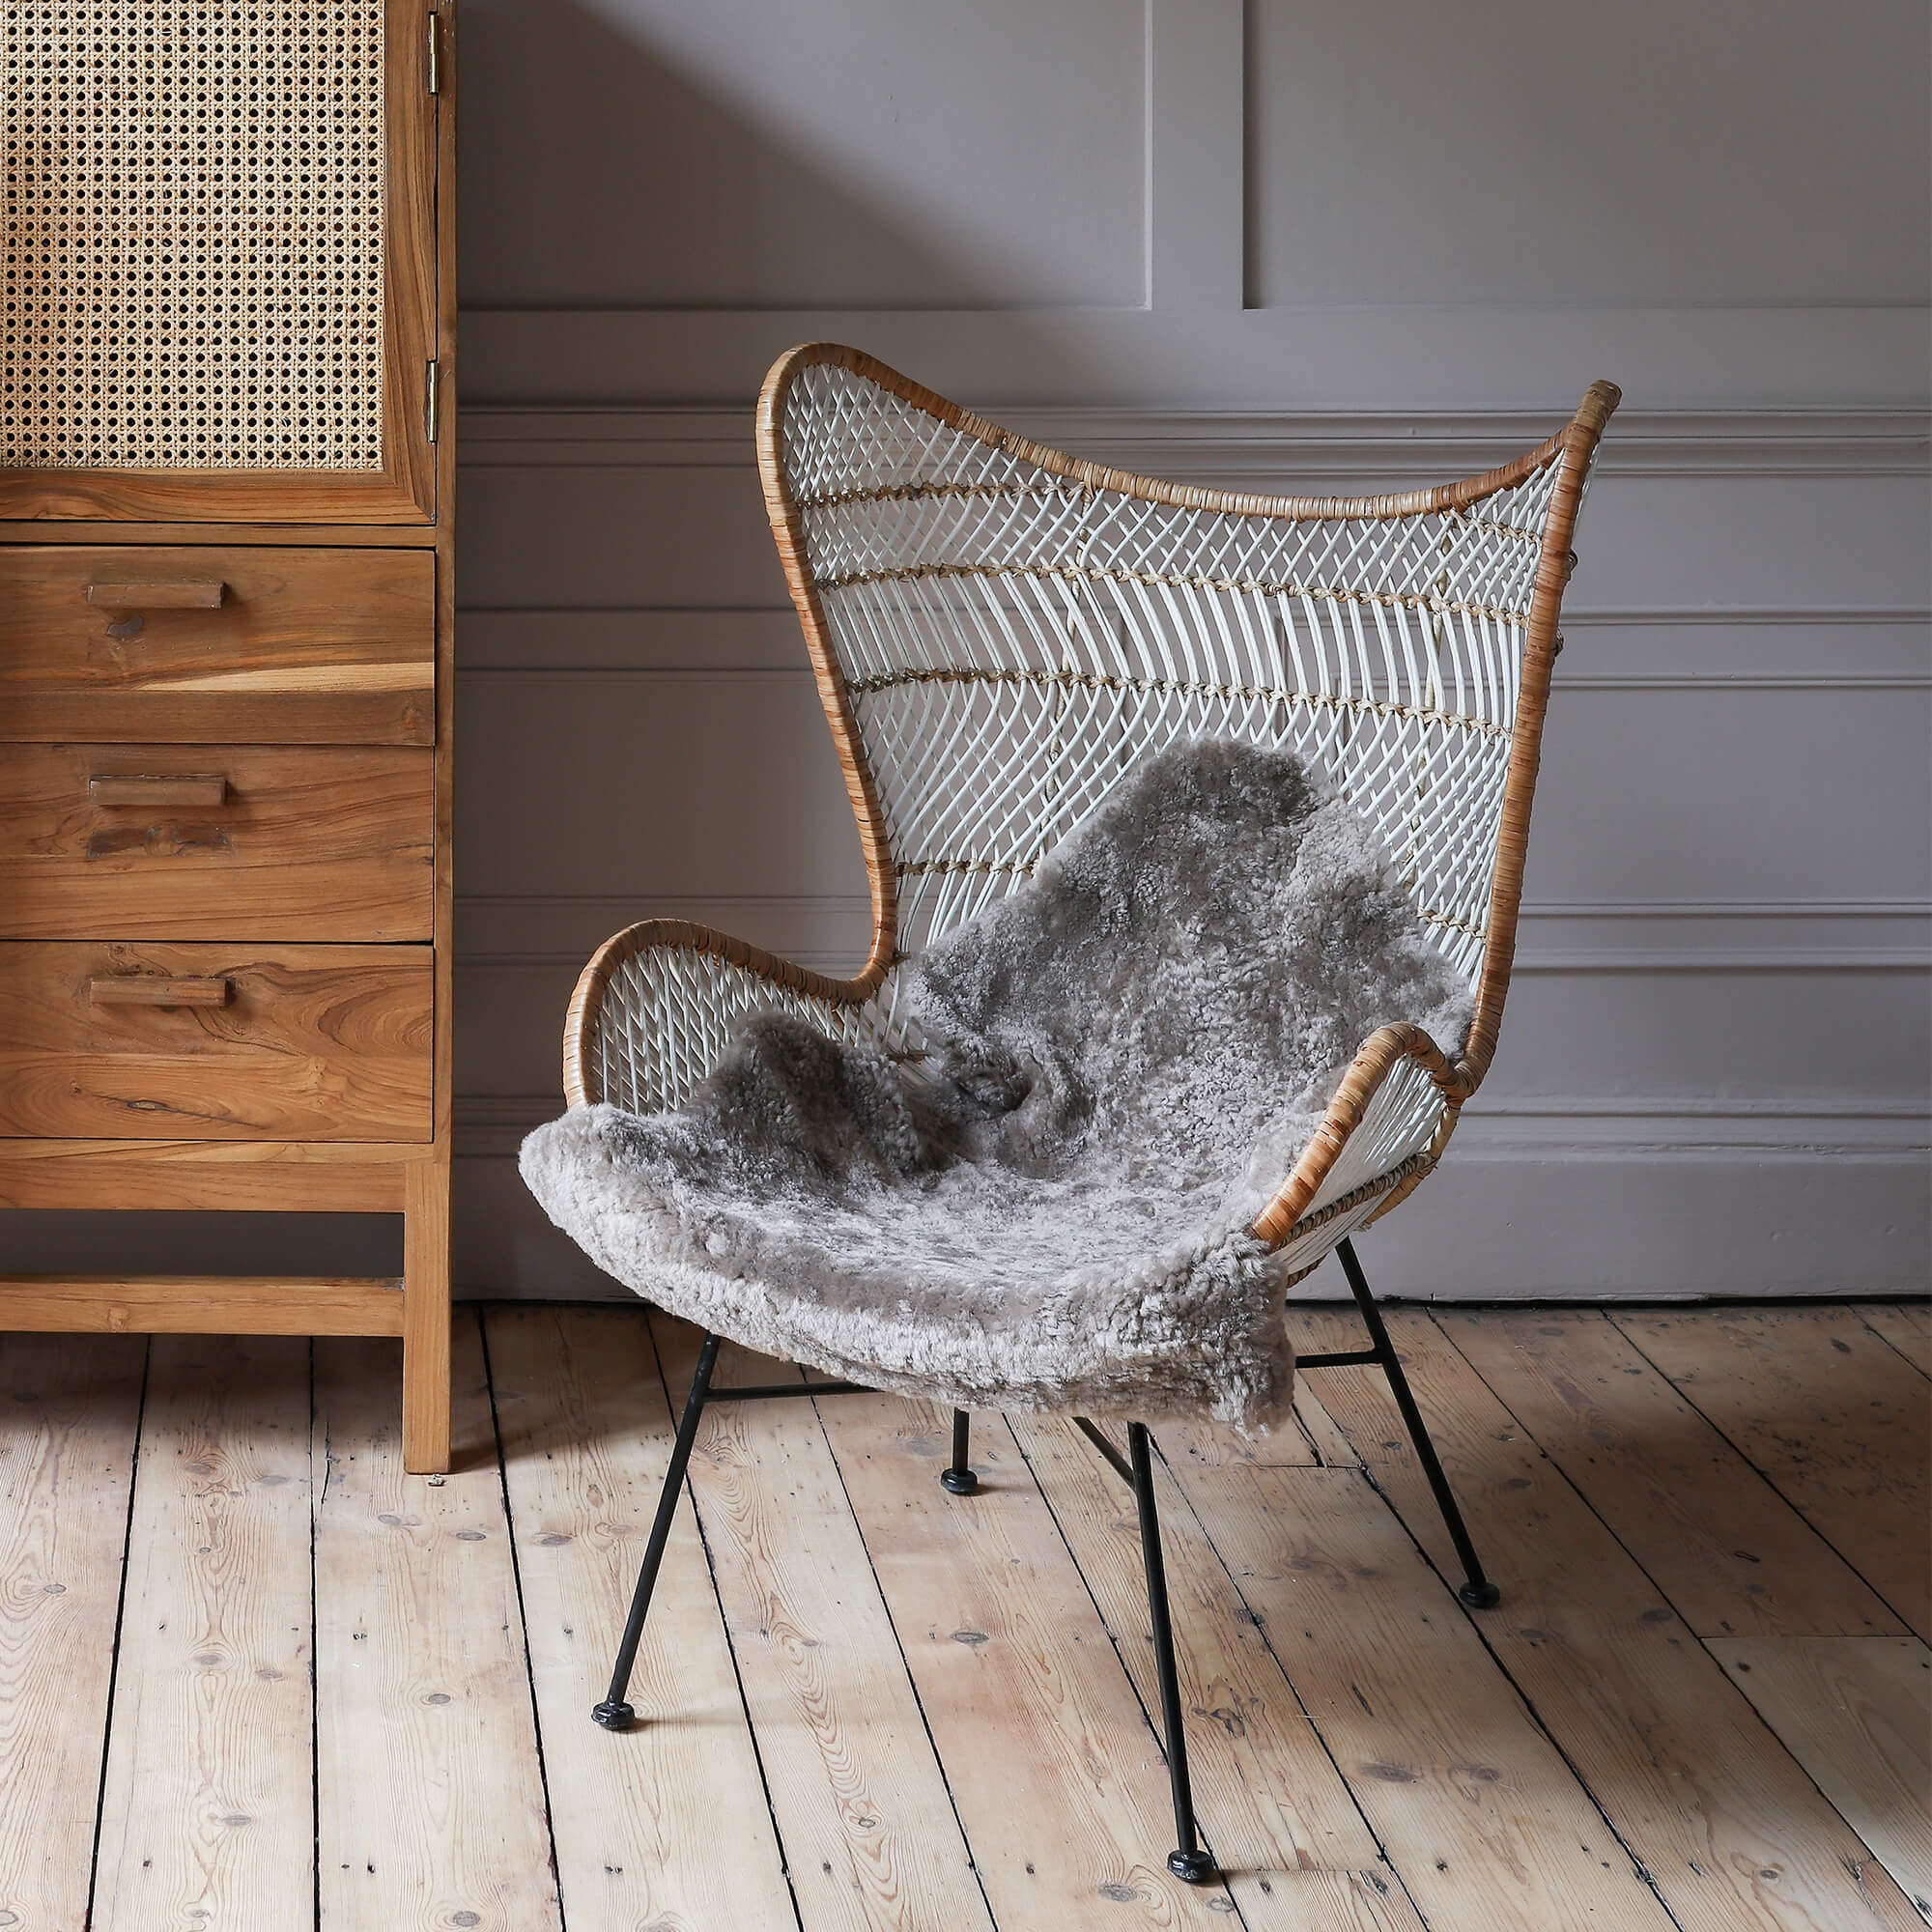 Photo of Graham and green oslow mini winged wicker chair